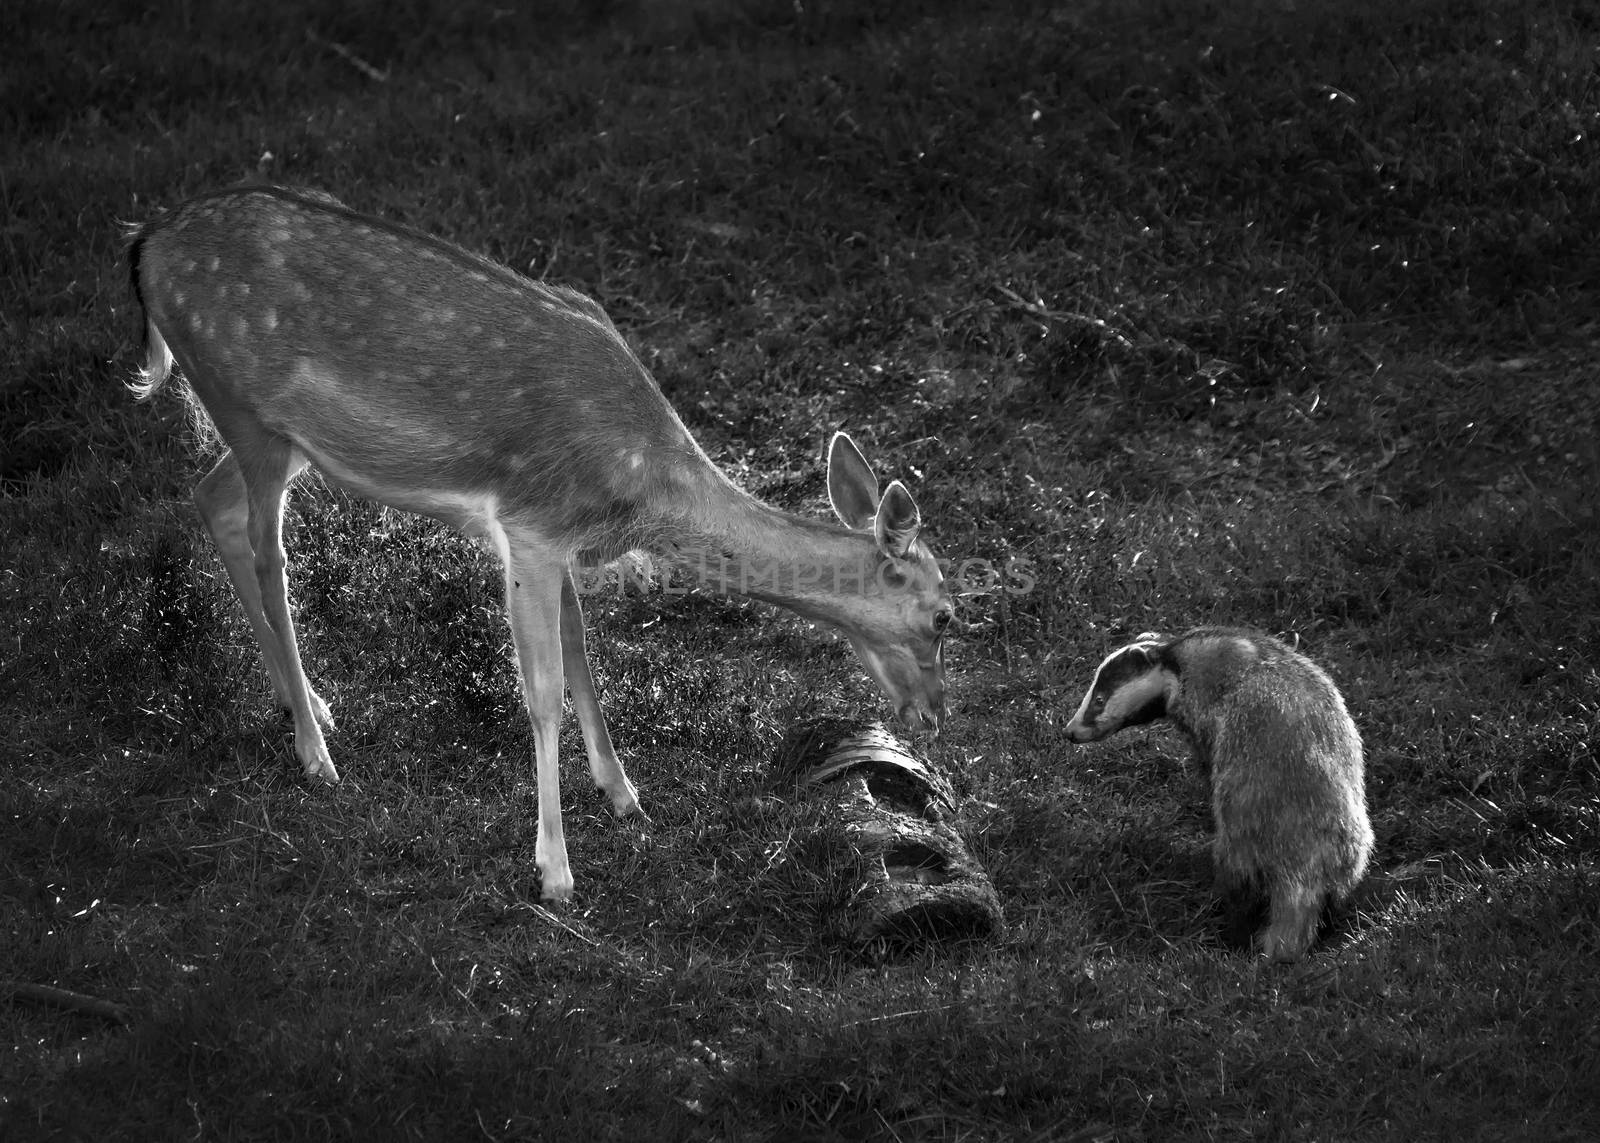 Badger and deer wild animals face to face while feeding in a woodland forest black and white monochrome image